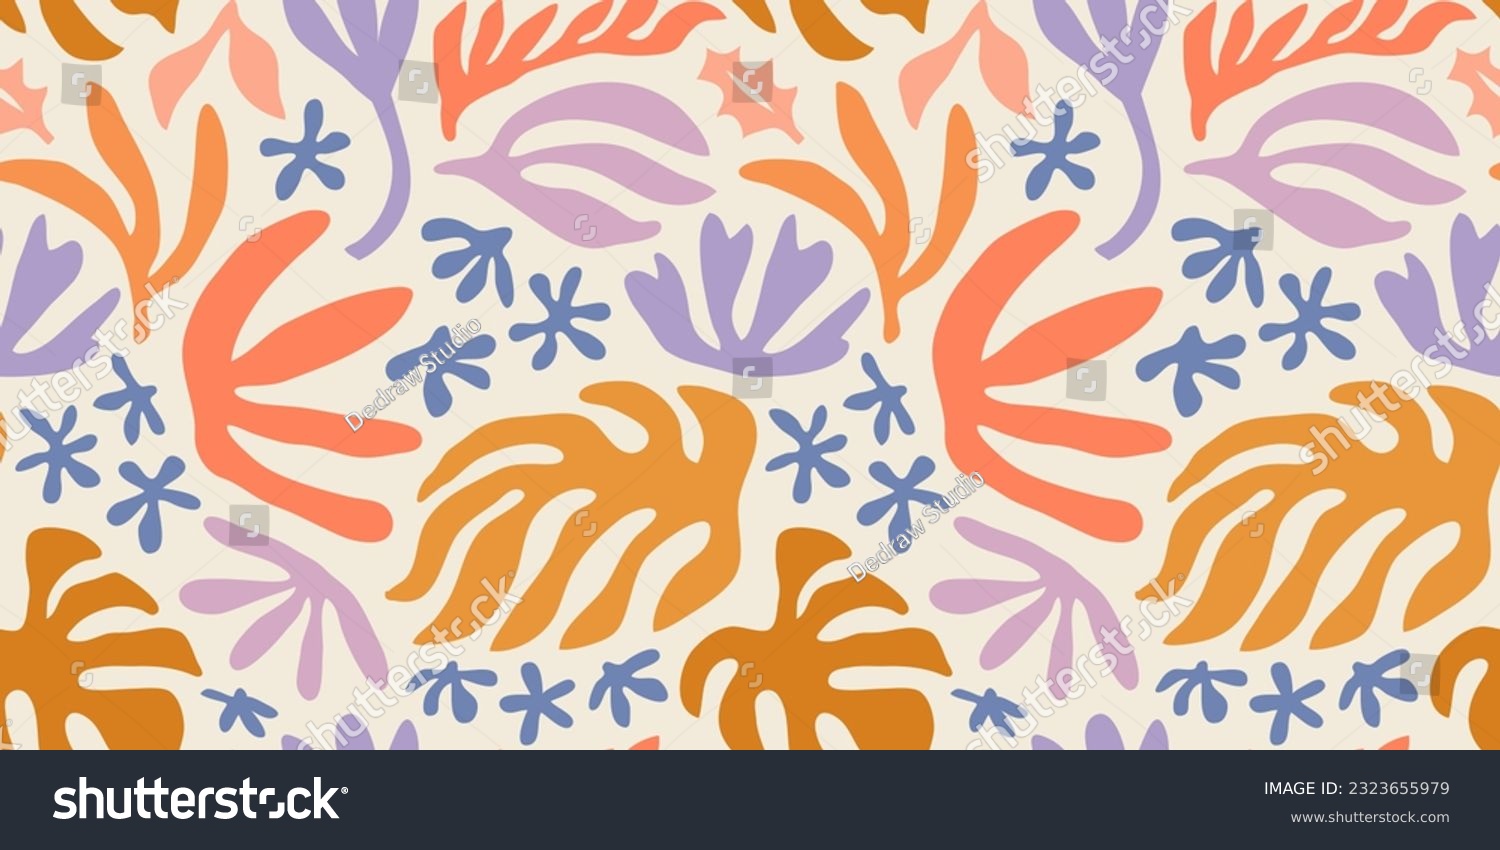 SVG of Abstract plant leaf art seamless pattern with colorful freehand doodle collage. Organic leaves cartoon background, simple nature shapes in vintage pastel colors.  svg